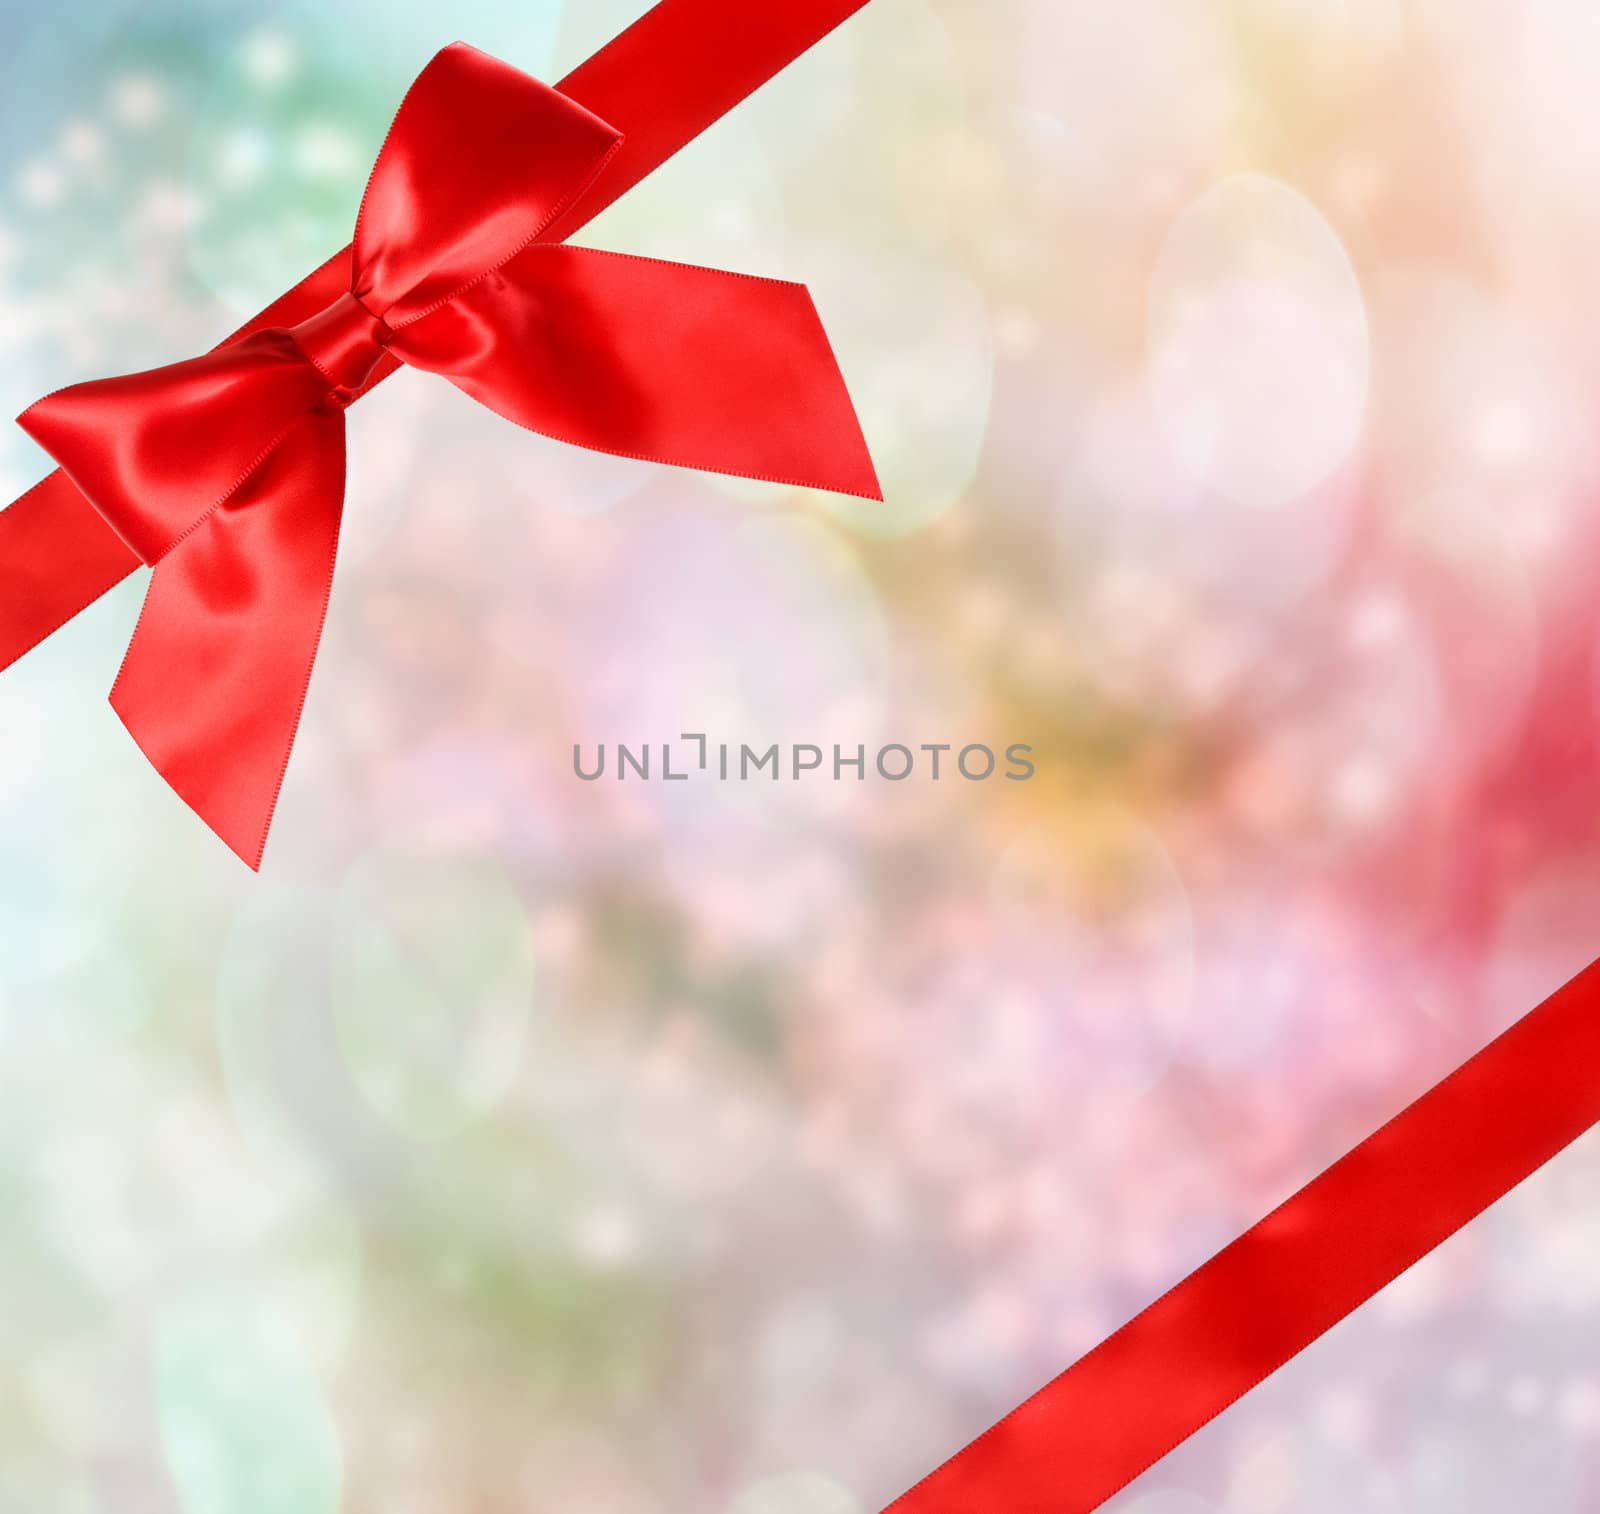 Red Bow and Ribbon with Pastel Bokeh Lights Background 